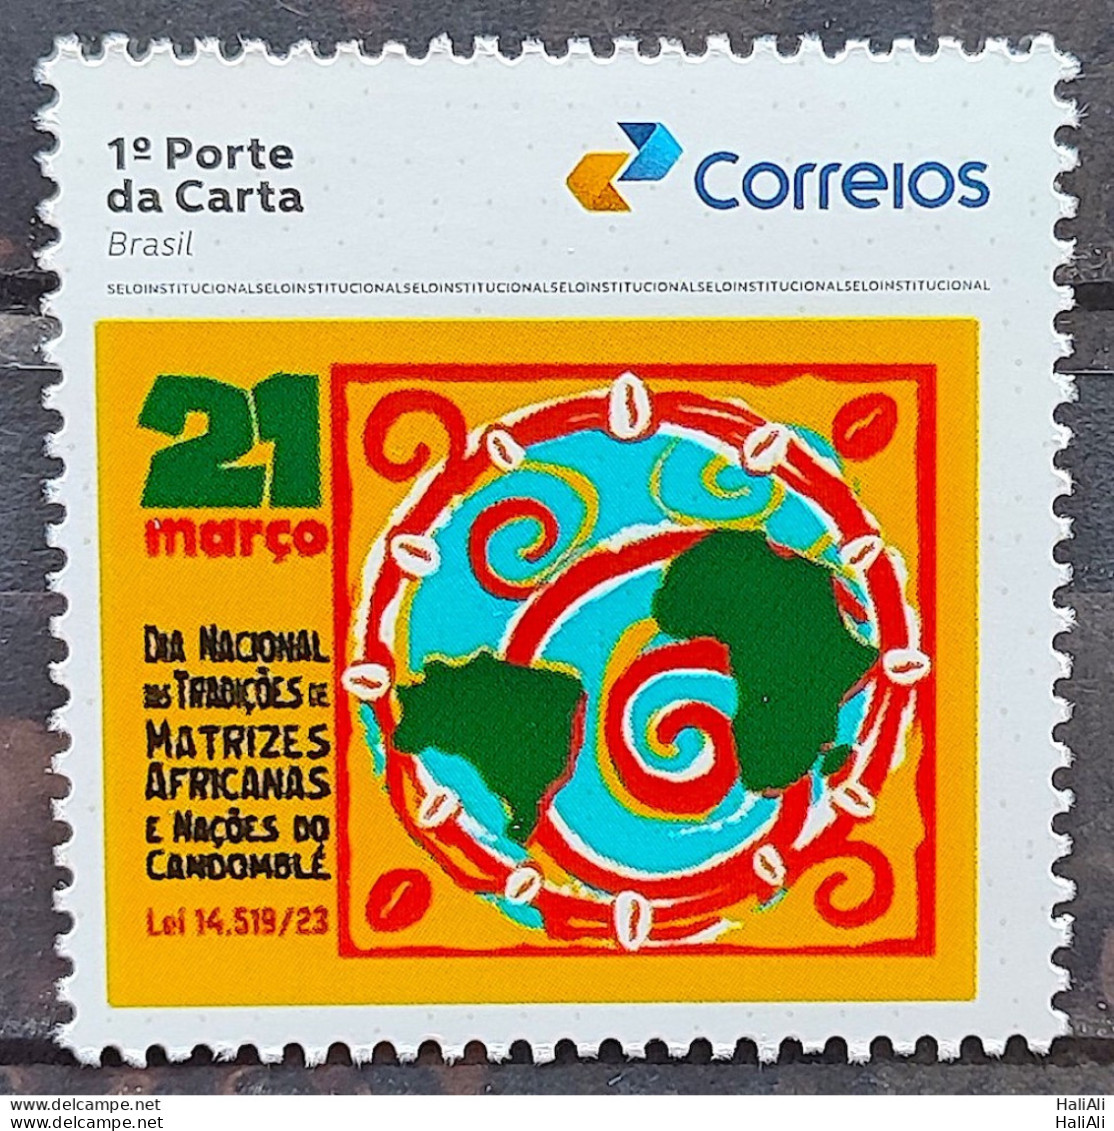 SI 06 Brazil Institutional Stamp Traditions Of African Matrices And Candomble Nations Map 2023 - Gepersonaliseerde Postzegels